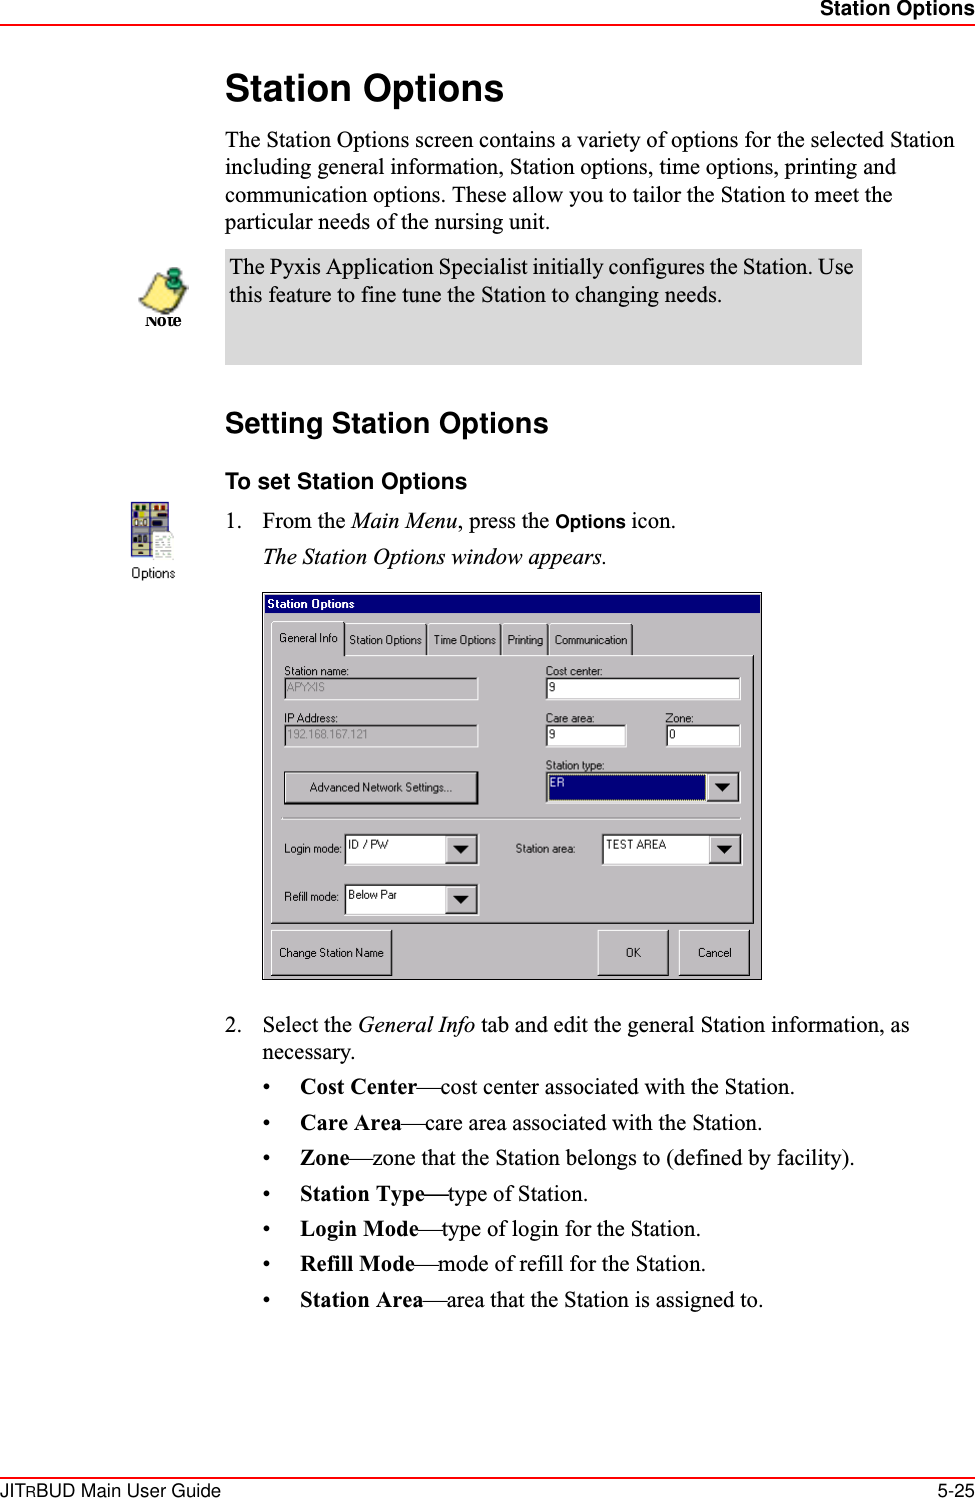 Station OptionsJITRBUD Main User Guide 5-25Station OptionsThe Station Options screen contains a variety of options for the selected Station including general information, Station options, time options, printing and communication options. These allow you to tailor the Station to meet the particular needs of the nursing unit. Setting Station OptionsTo set Station Options1. From the Main Menu, press the Options icon. The Station Options window appears.2. Select the General Info tab and edit the general Station information, as necessary.•Cost Center—cost center associated with the Station.•Care Area—care area associated with the Station.•Zone—zone that the Station belongs to (defined by facility). •Station Type—type of Station.•Login Mode—type of login for the Station.•Refill Mode—mode of refill for the Station.•Station Area—area that the Station is assigned to.The Pyxis Application Specialist initially configures the Station. Use this feature to fine tune the Station to changing needs.Note